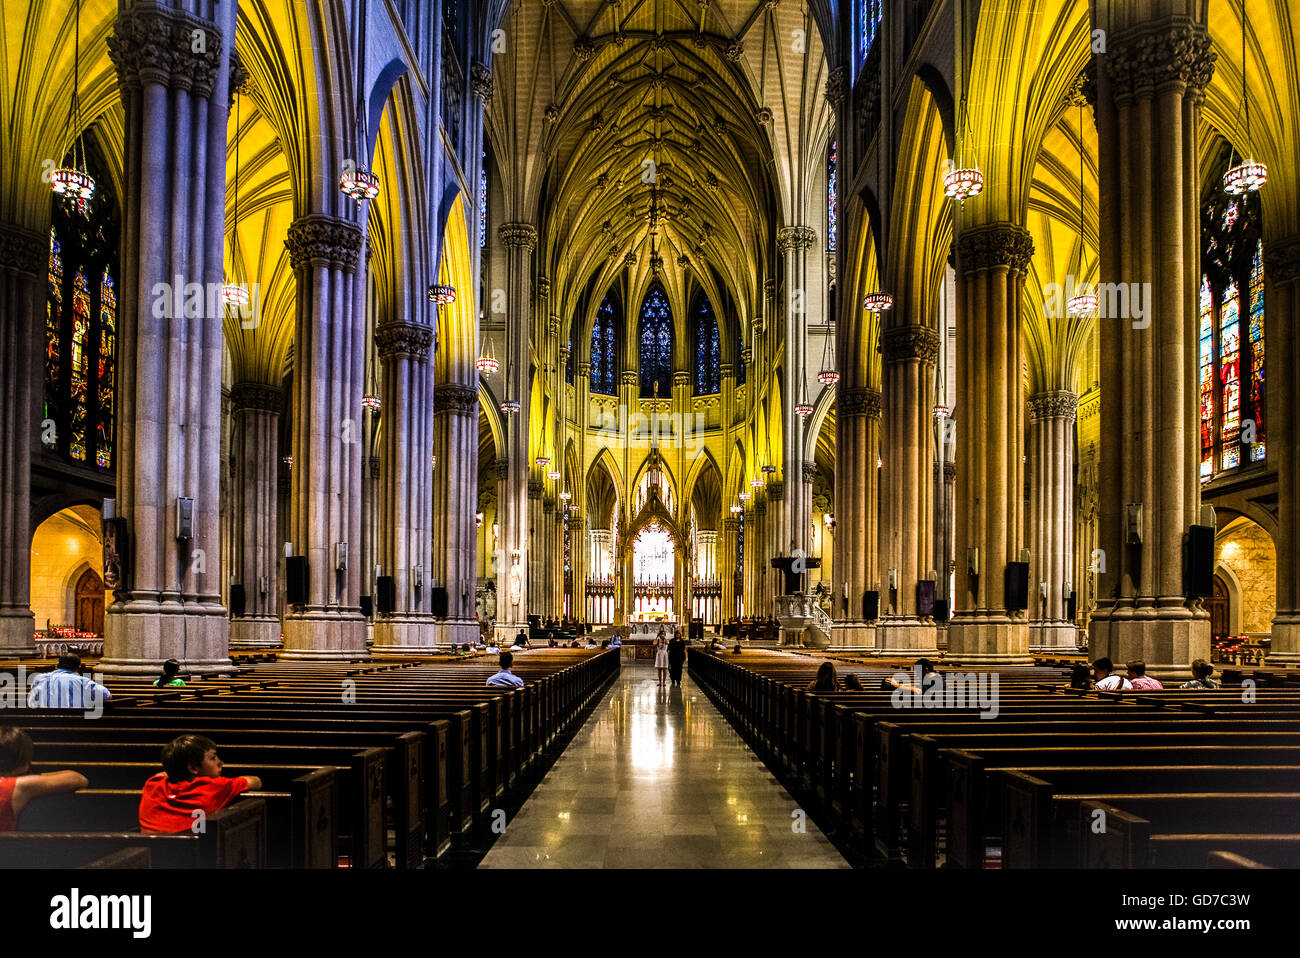 U.S.A., New York,Manhattan,5th avenue,the inside of St.Patrick cathedral Stock Photo